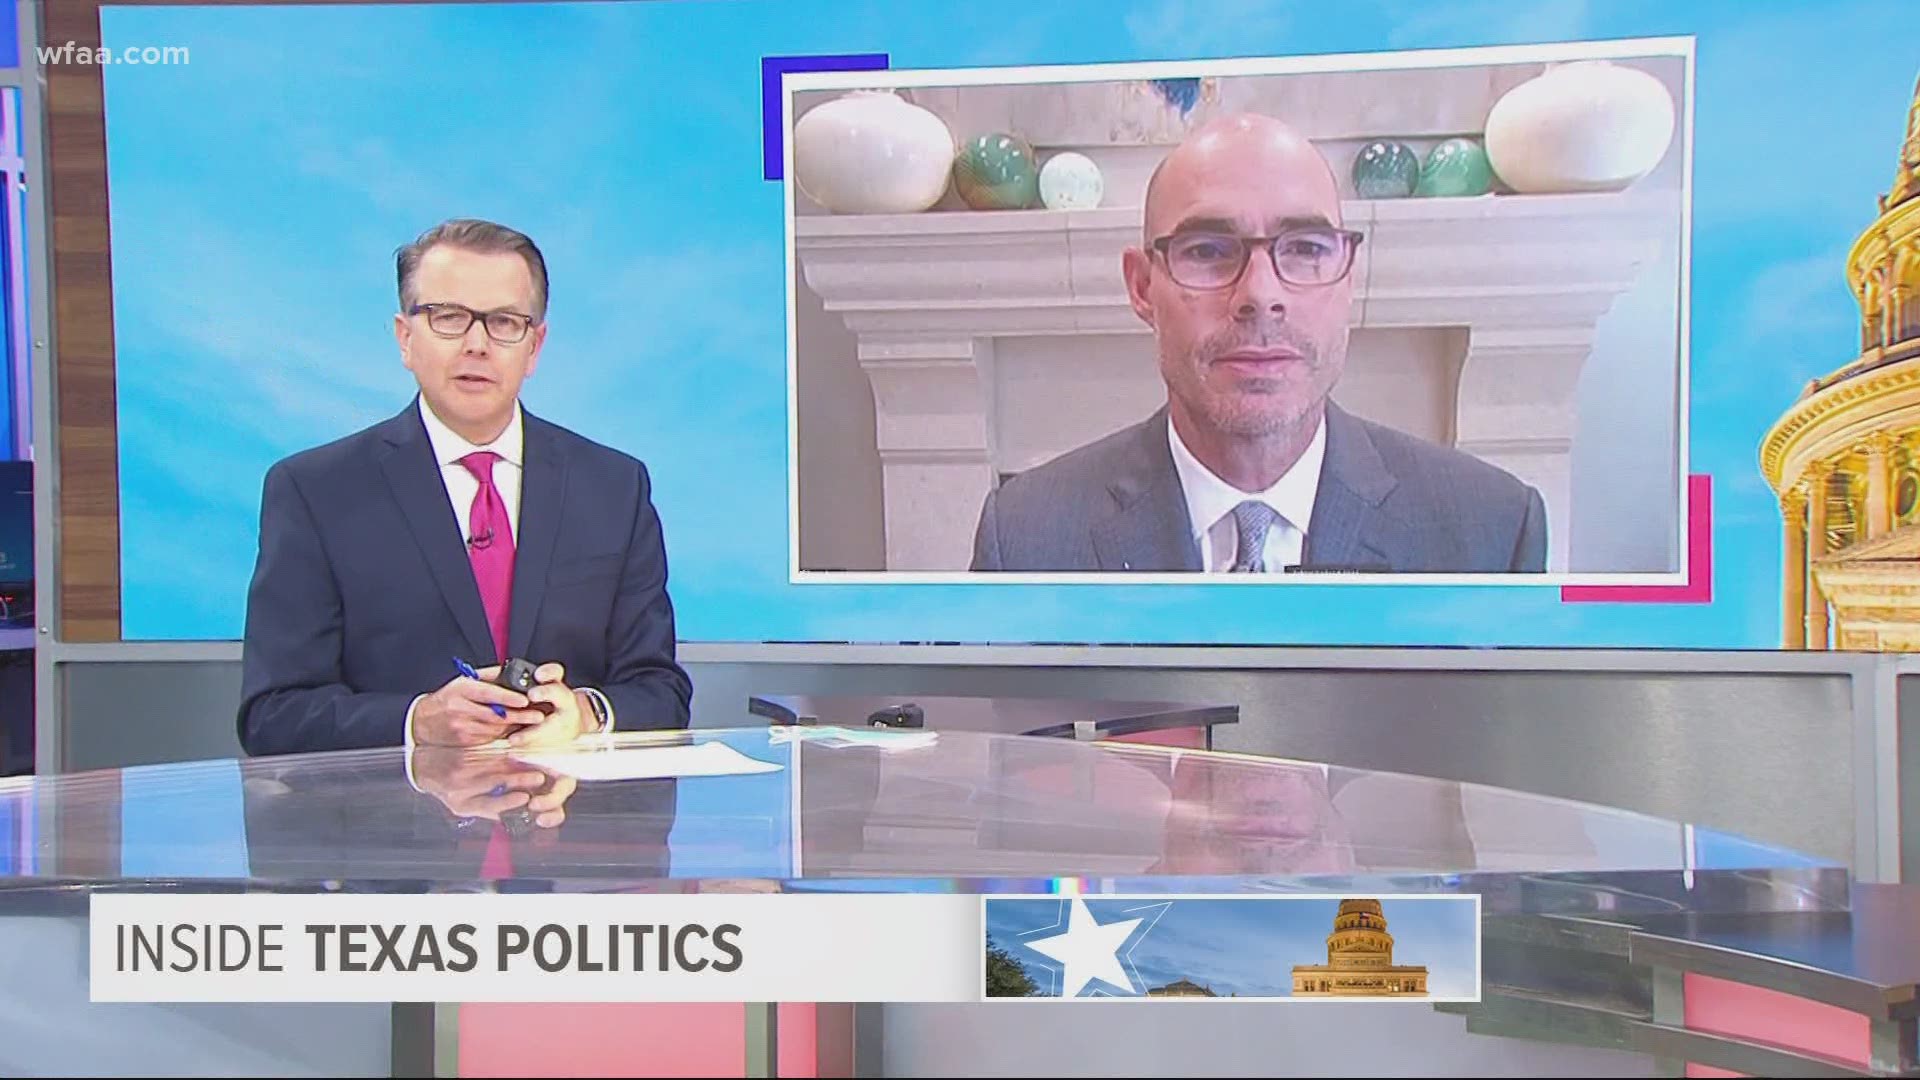 Texas Speaker of the House Dennis Bonnen spoke with Jason Whitely on whether Texas reopened too early, the debate on masks & what school will look like in the fall.